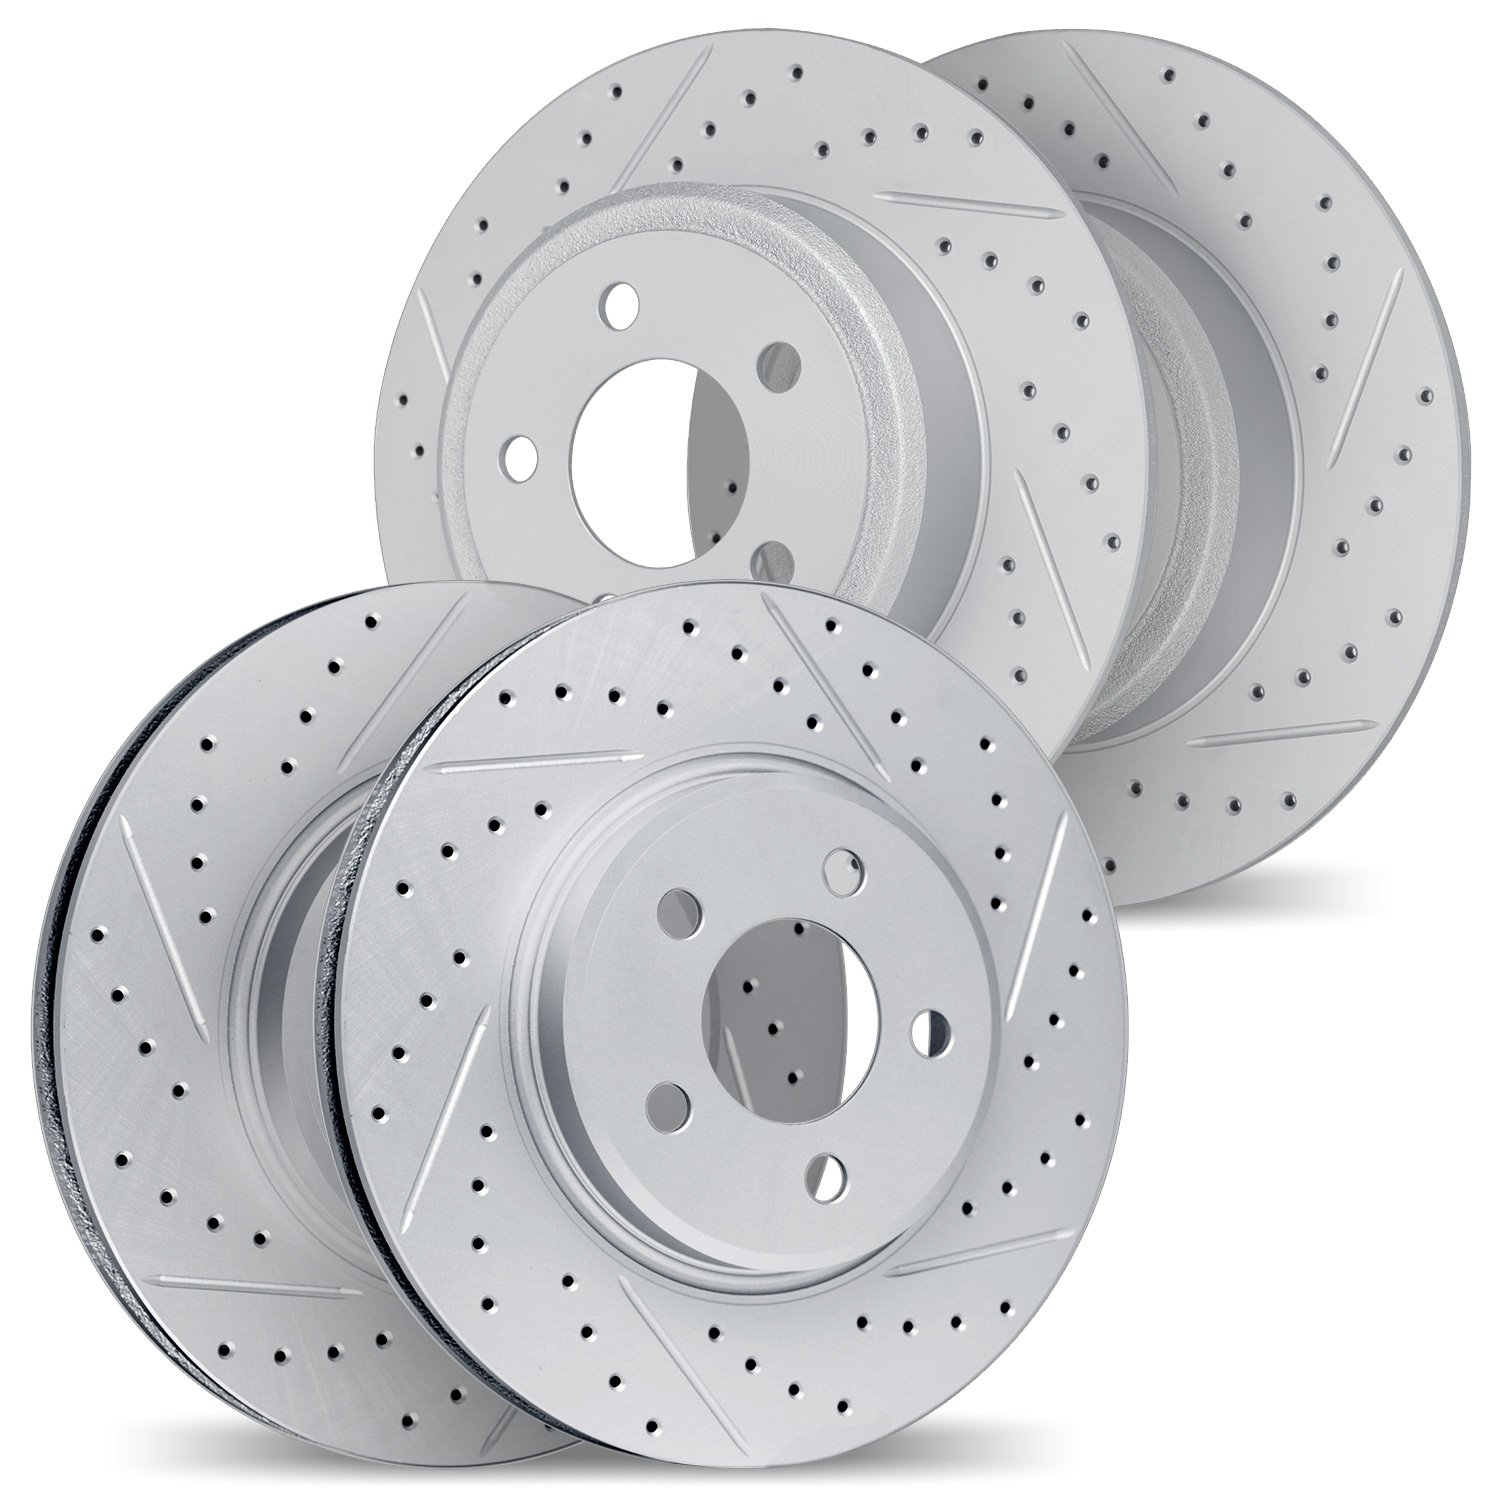 2004-03043 Geoperformance Drilled/Slotted Brake Rotors, 2005-2016 Kia/Hyundai/Genesis, Position: Front and Rear